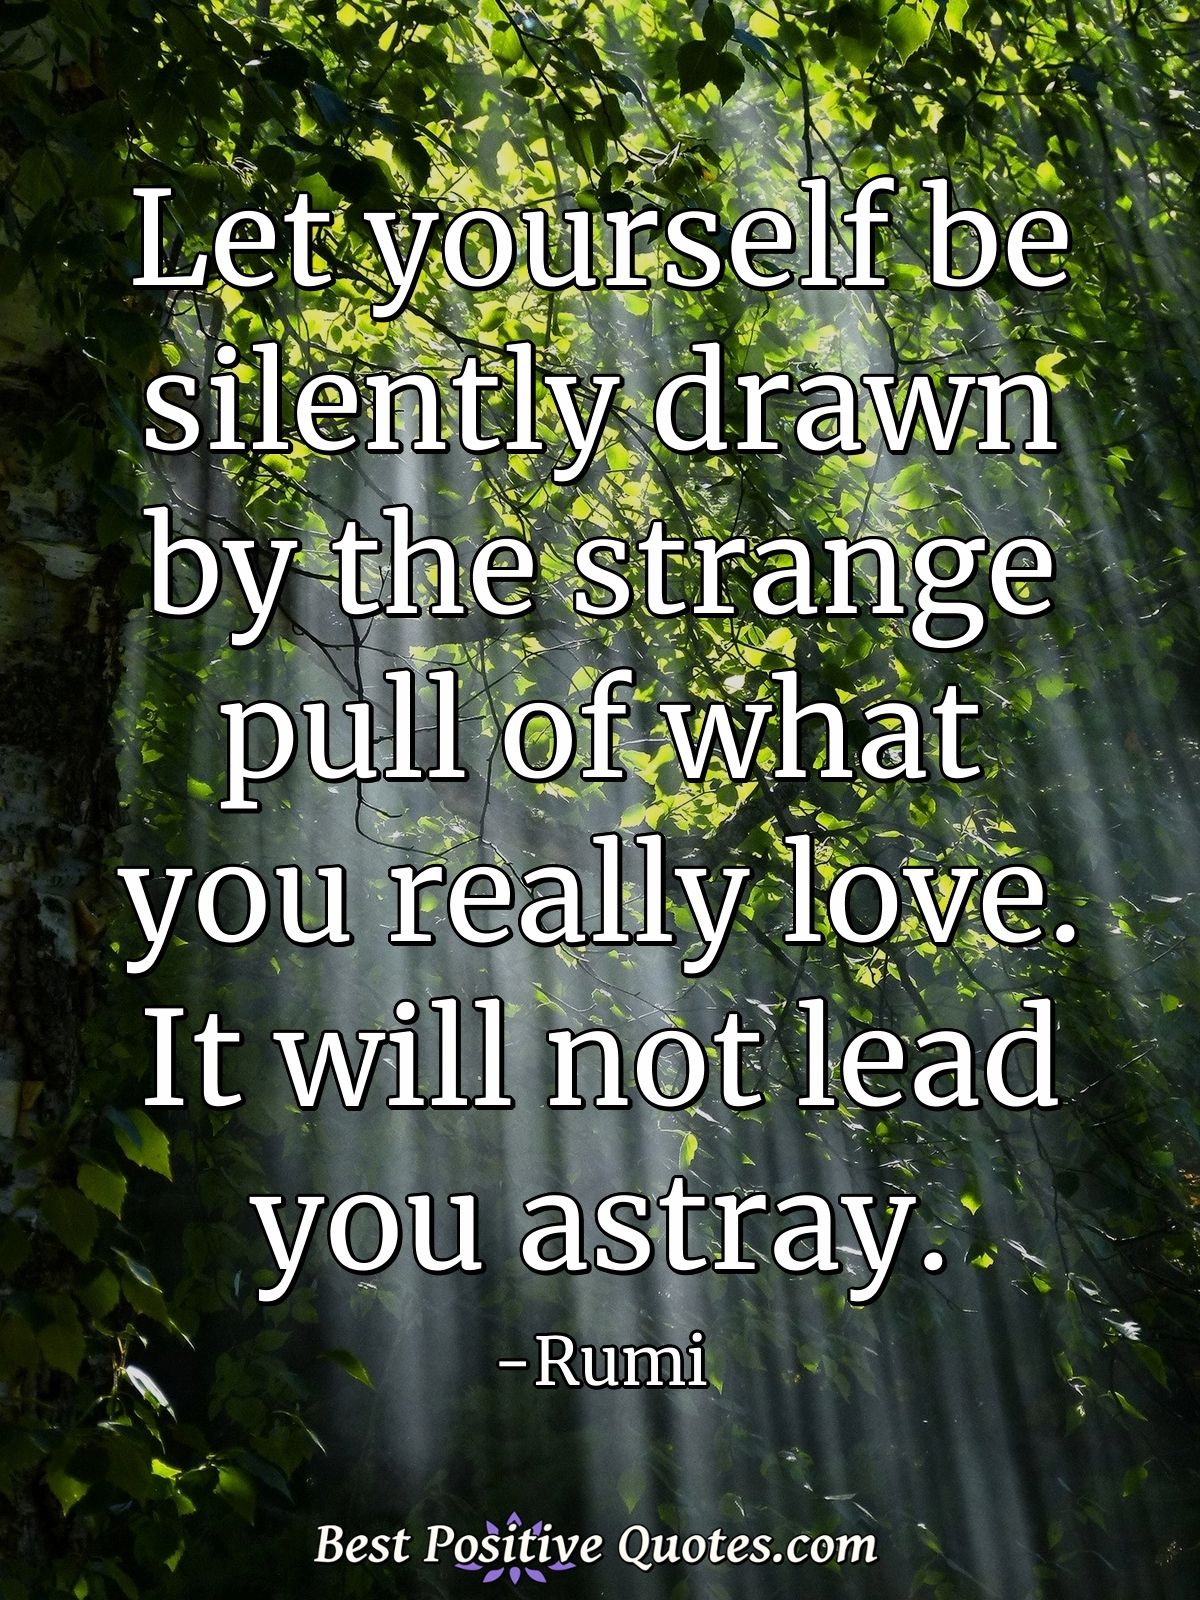 Let yourself be silently drawn by the strange pull of what you really love. It will not lead you astray. - Rumi